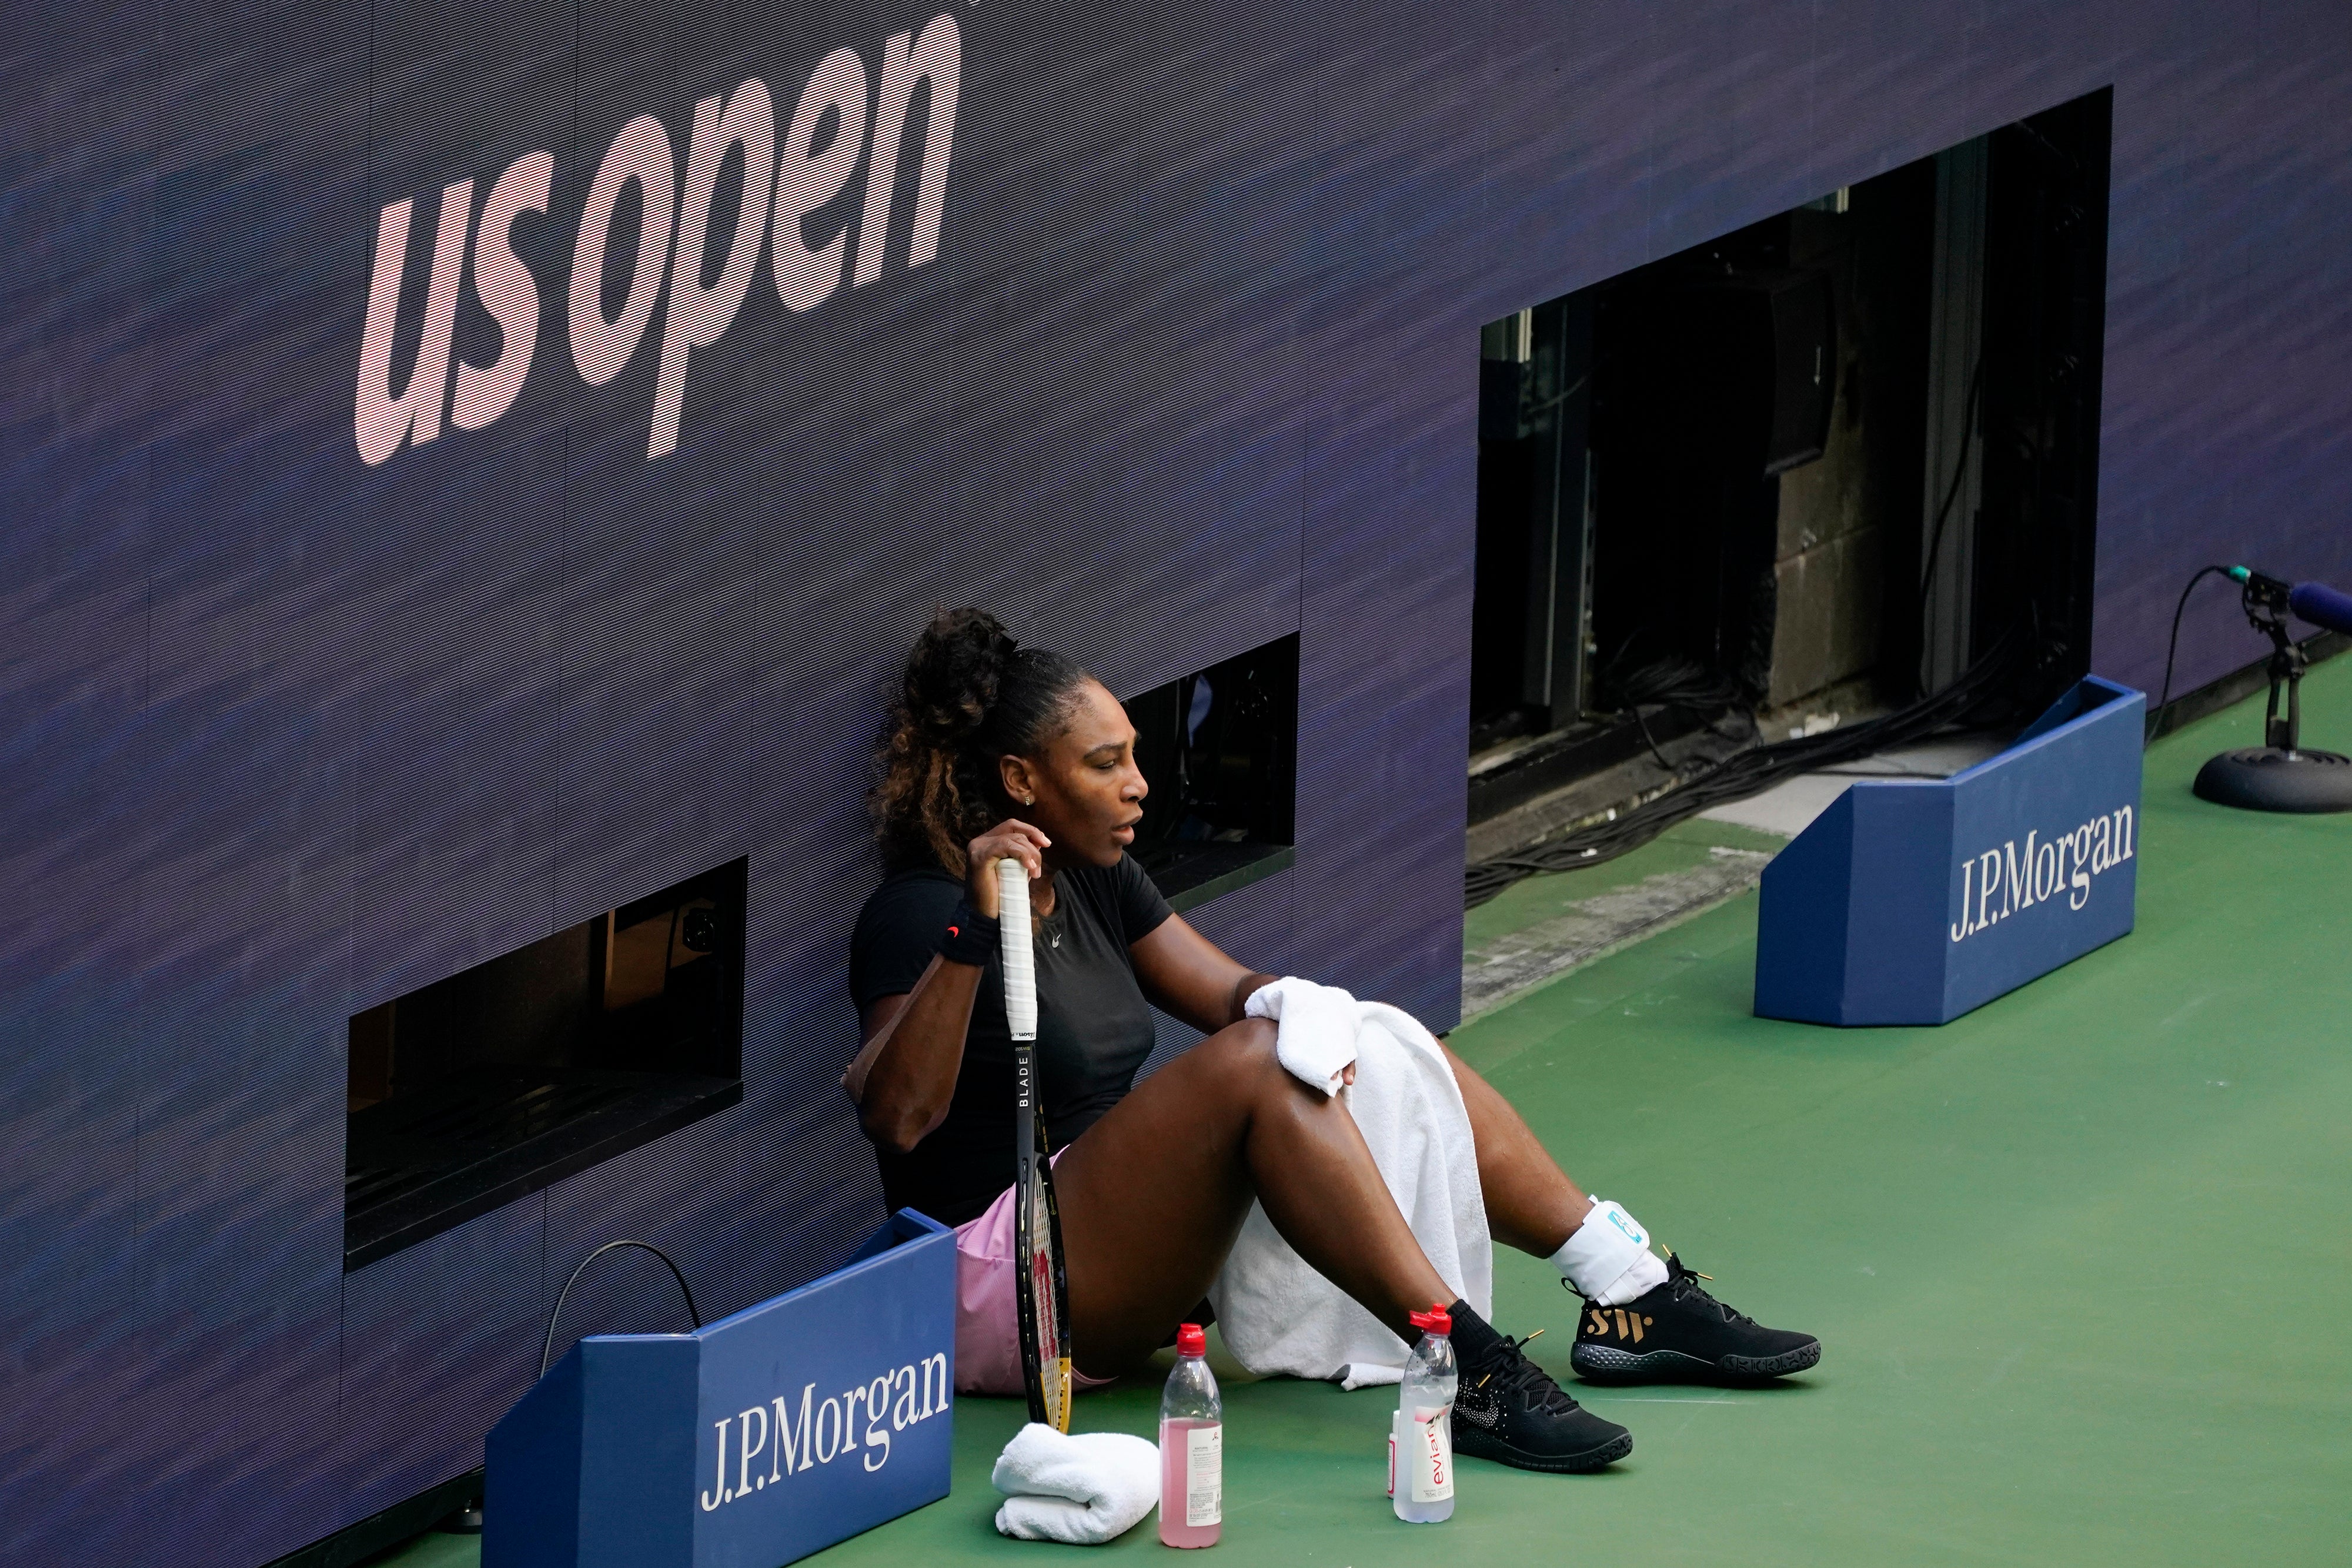 Serena Williams rests while practicing at Arthur Ashe Stadium before the start of the U.S. Open tennis tournament in New York, Thursday, Aug. 25, 2022. (AP Photo/Seth Wenig)